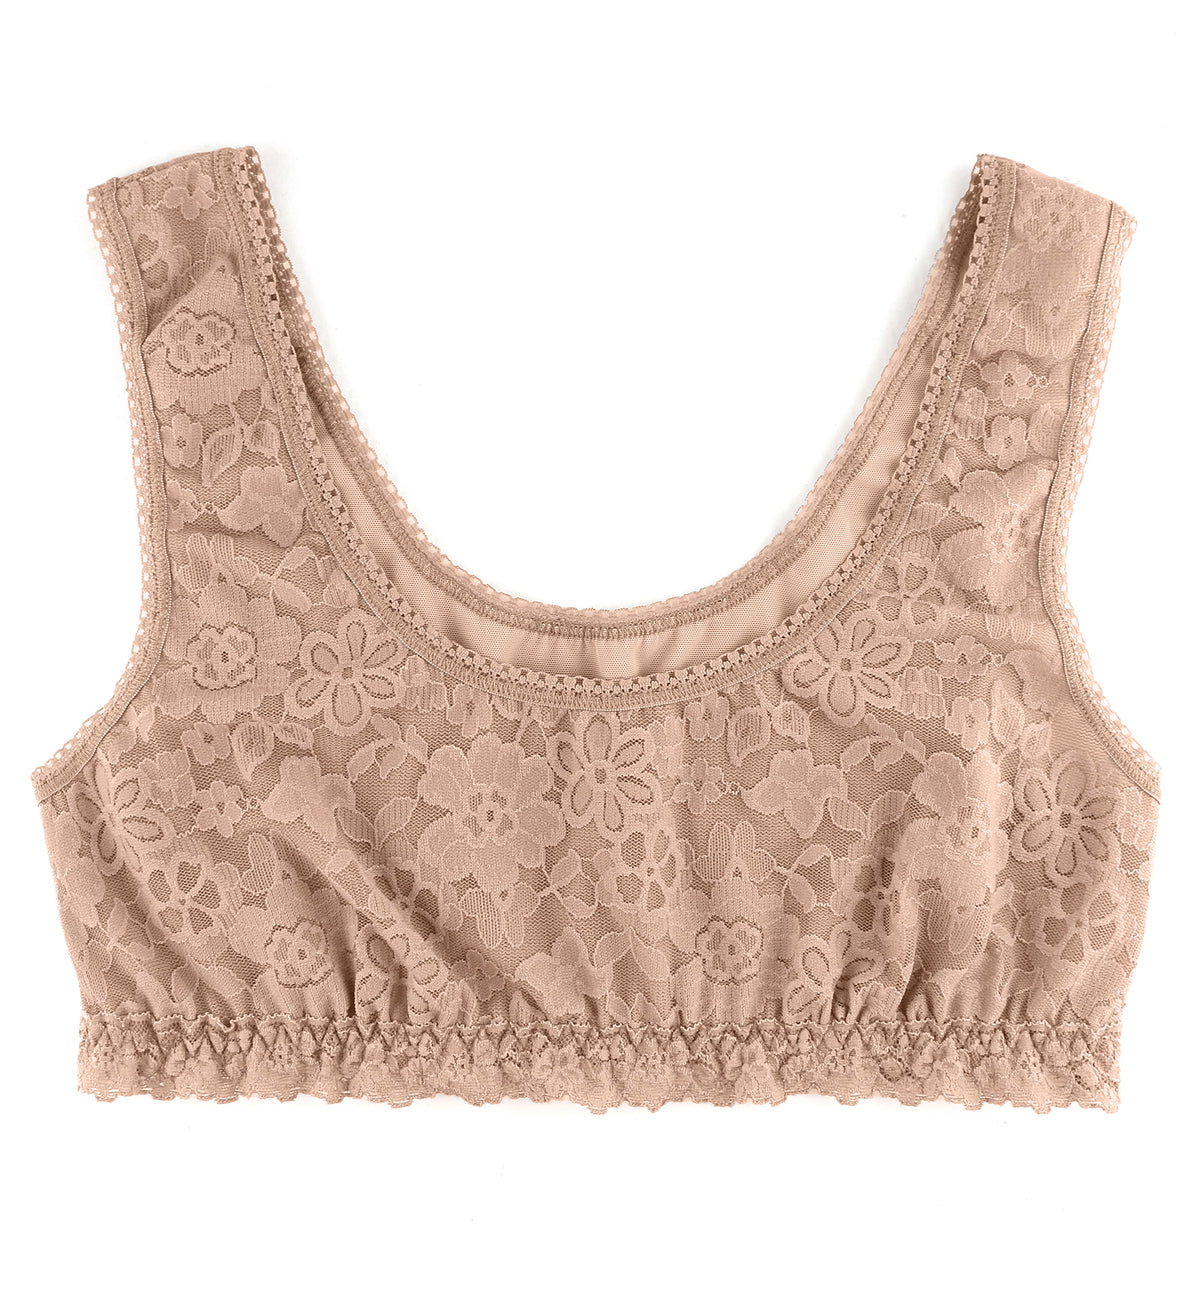 Hanky Panky Daily Lace Scoop Neck Lined Bralette (777991),XS,Taupe - Taupe,XS